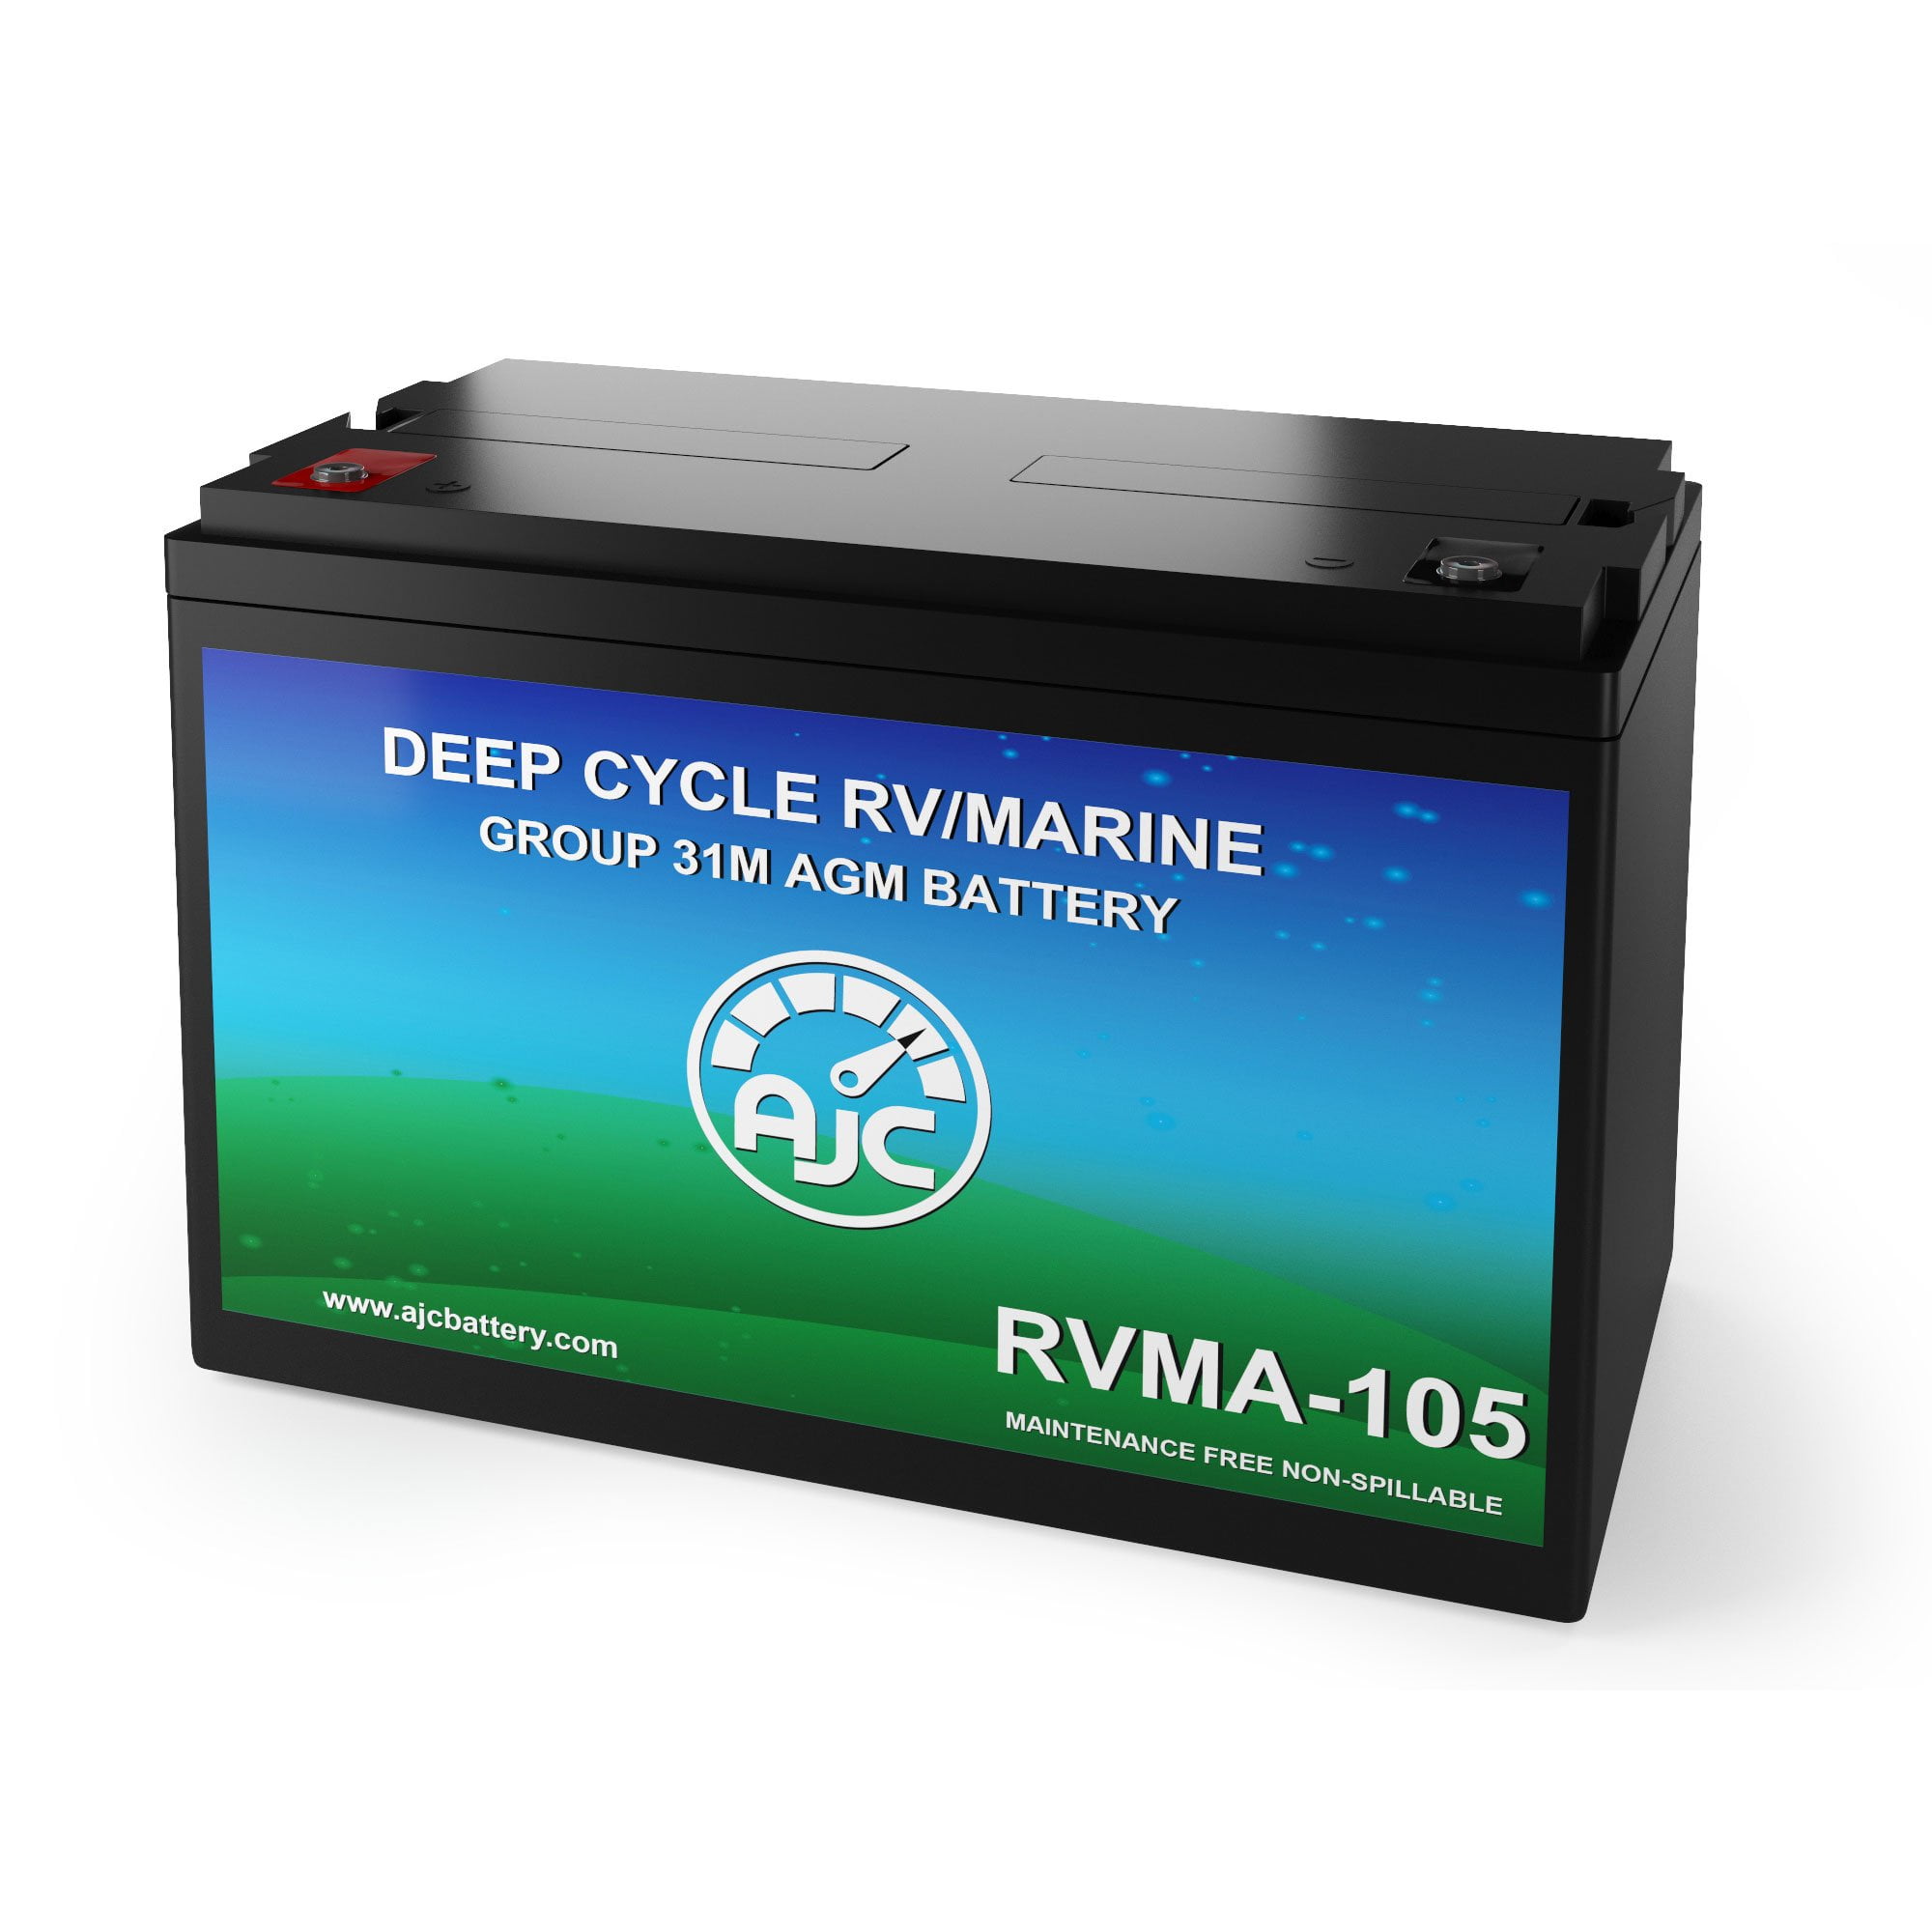 VMAXTANKS SLR100 Deep Cycle Solar AGM Battery for sale online 